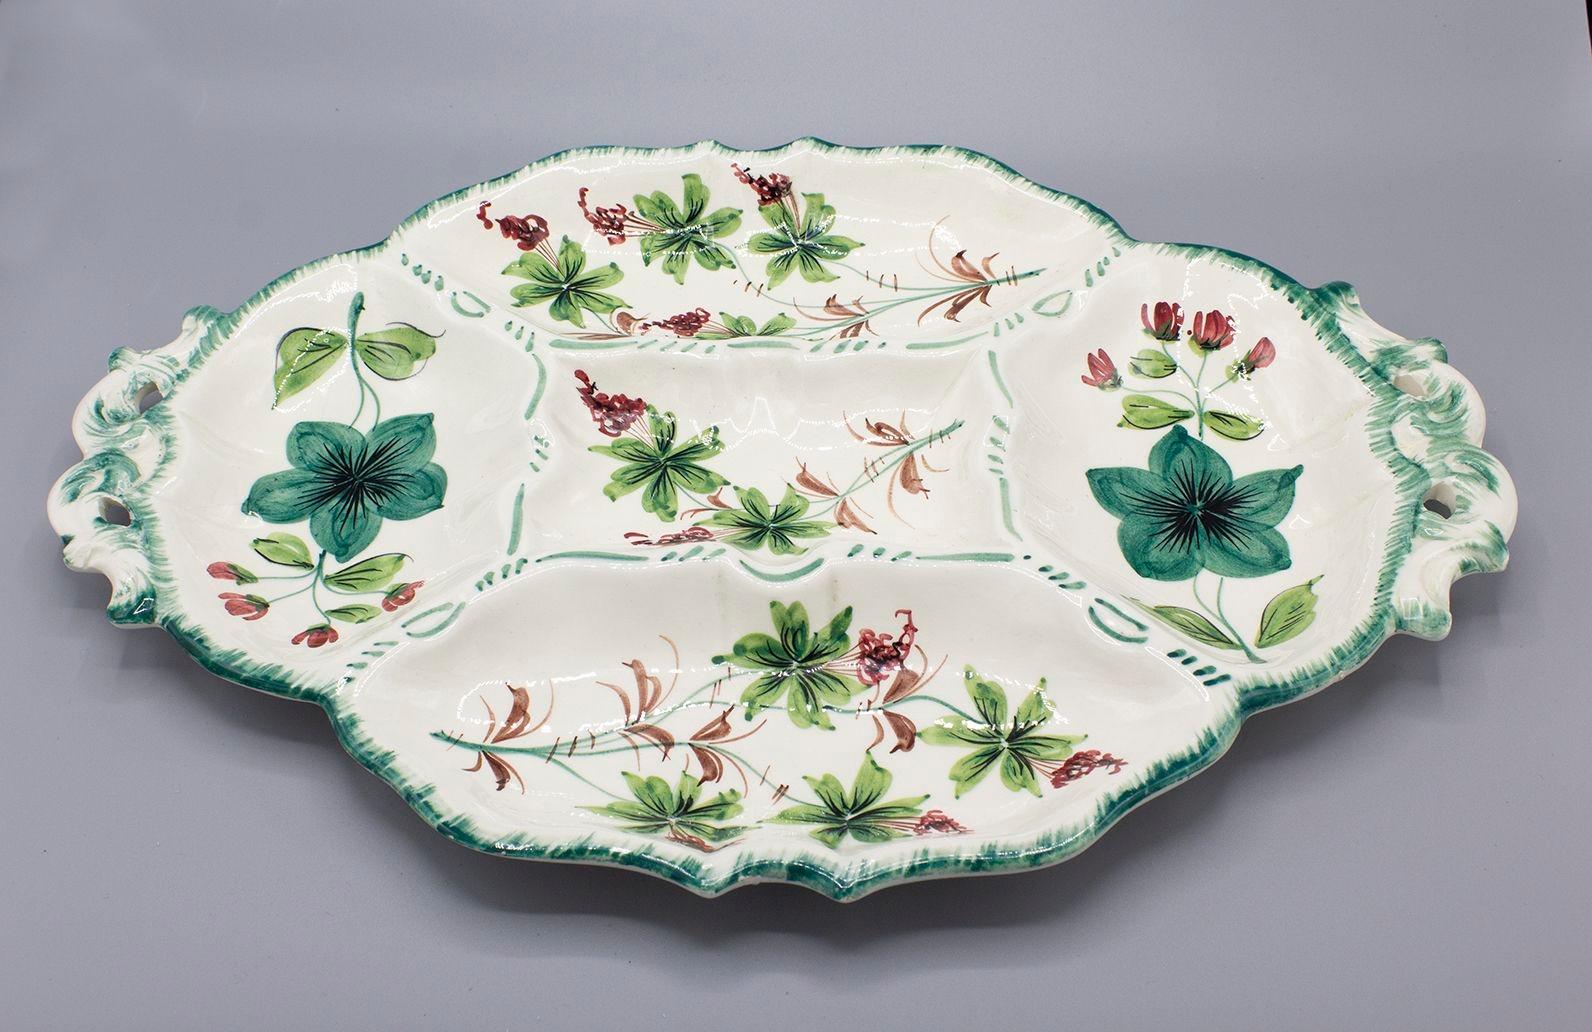 Italy, 1960s
Handpainted italian handled floral ceramic serving dish. This has five divided serving areas and is stamped on the base 'Made in Italy'.
CONDITION NOTES: Some areas of crazing to the finish or scratches at the edges (not